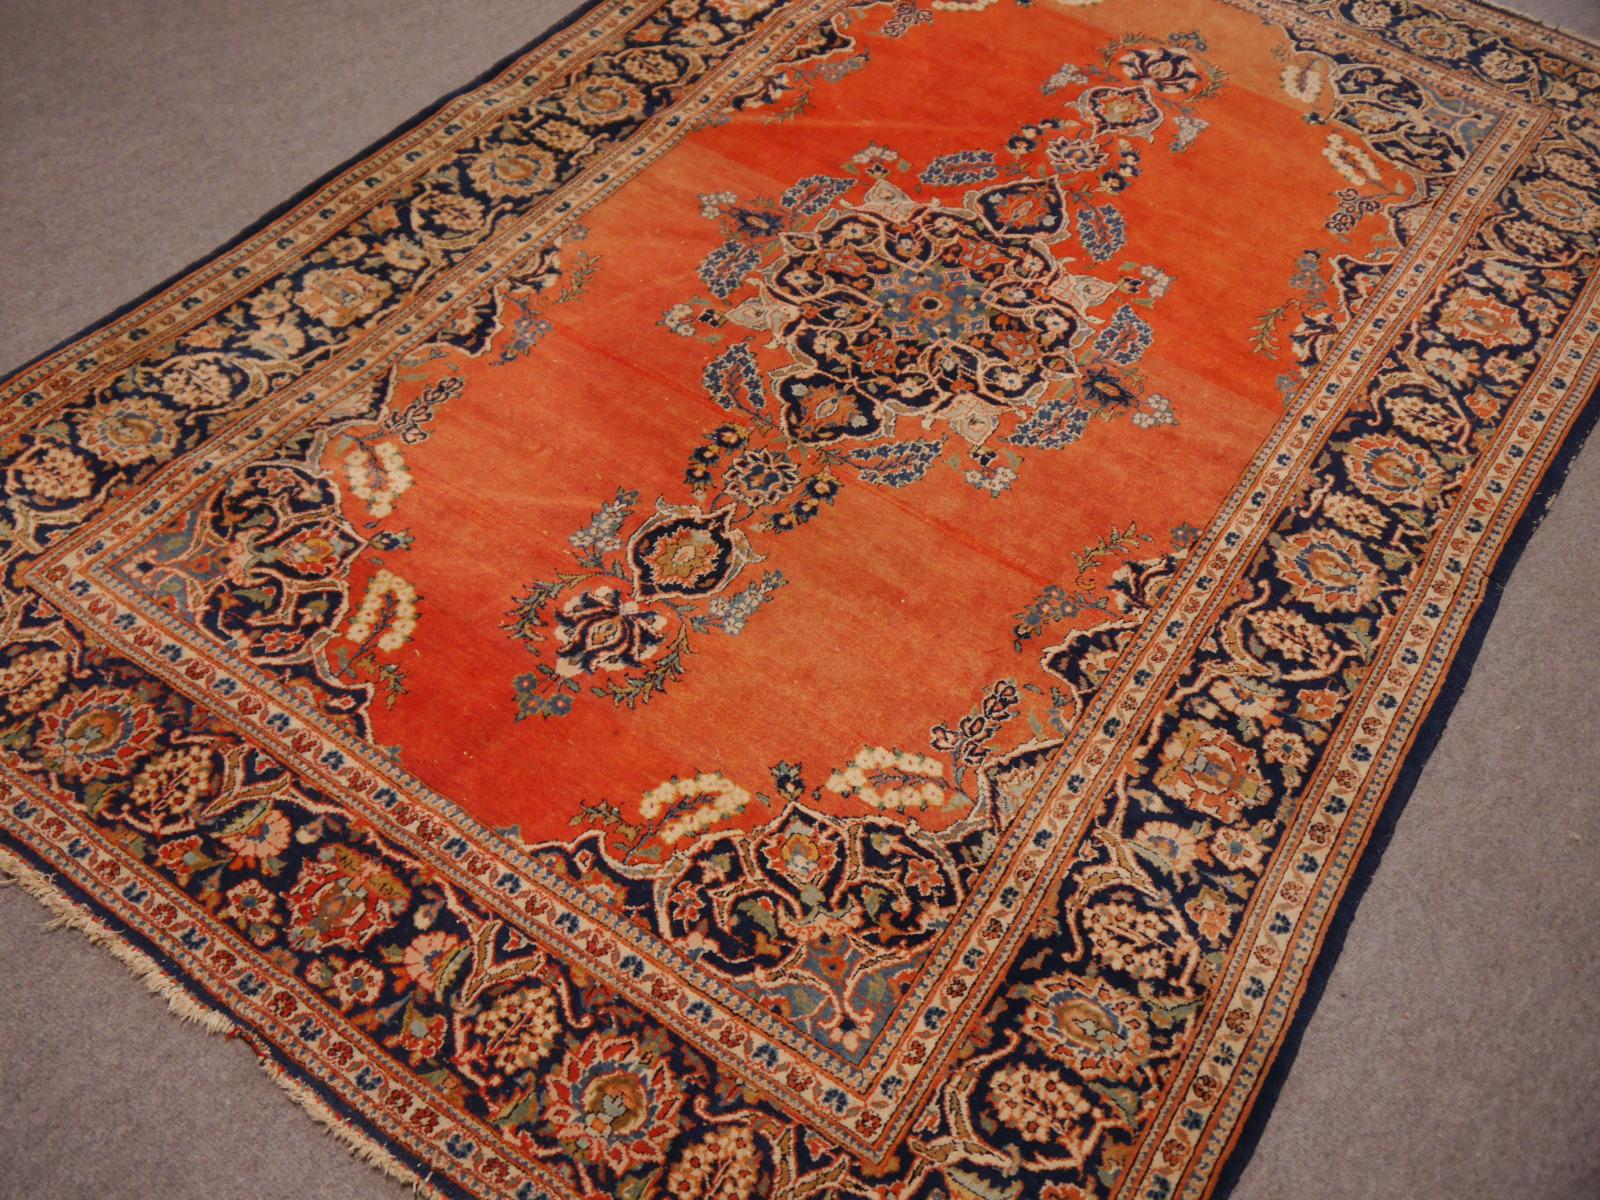 Kashan vintage rug, hand-knotted in salmon and blue - Djoharian Collection For Sale 5